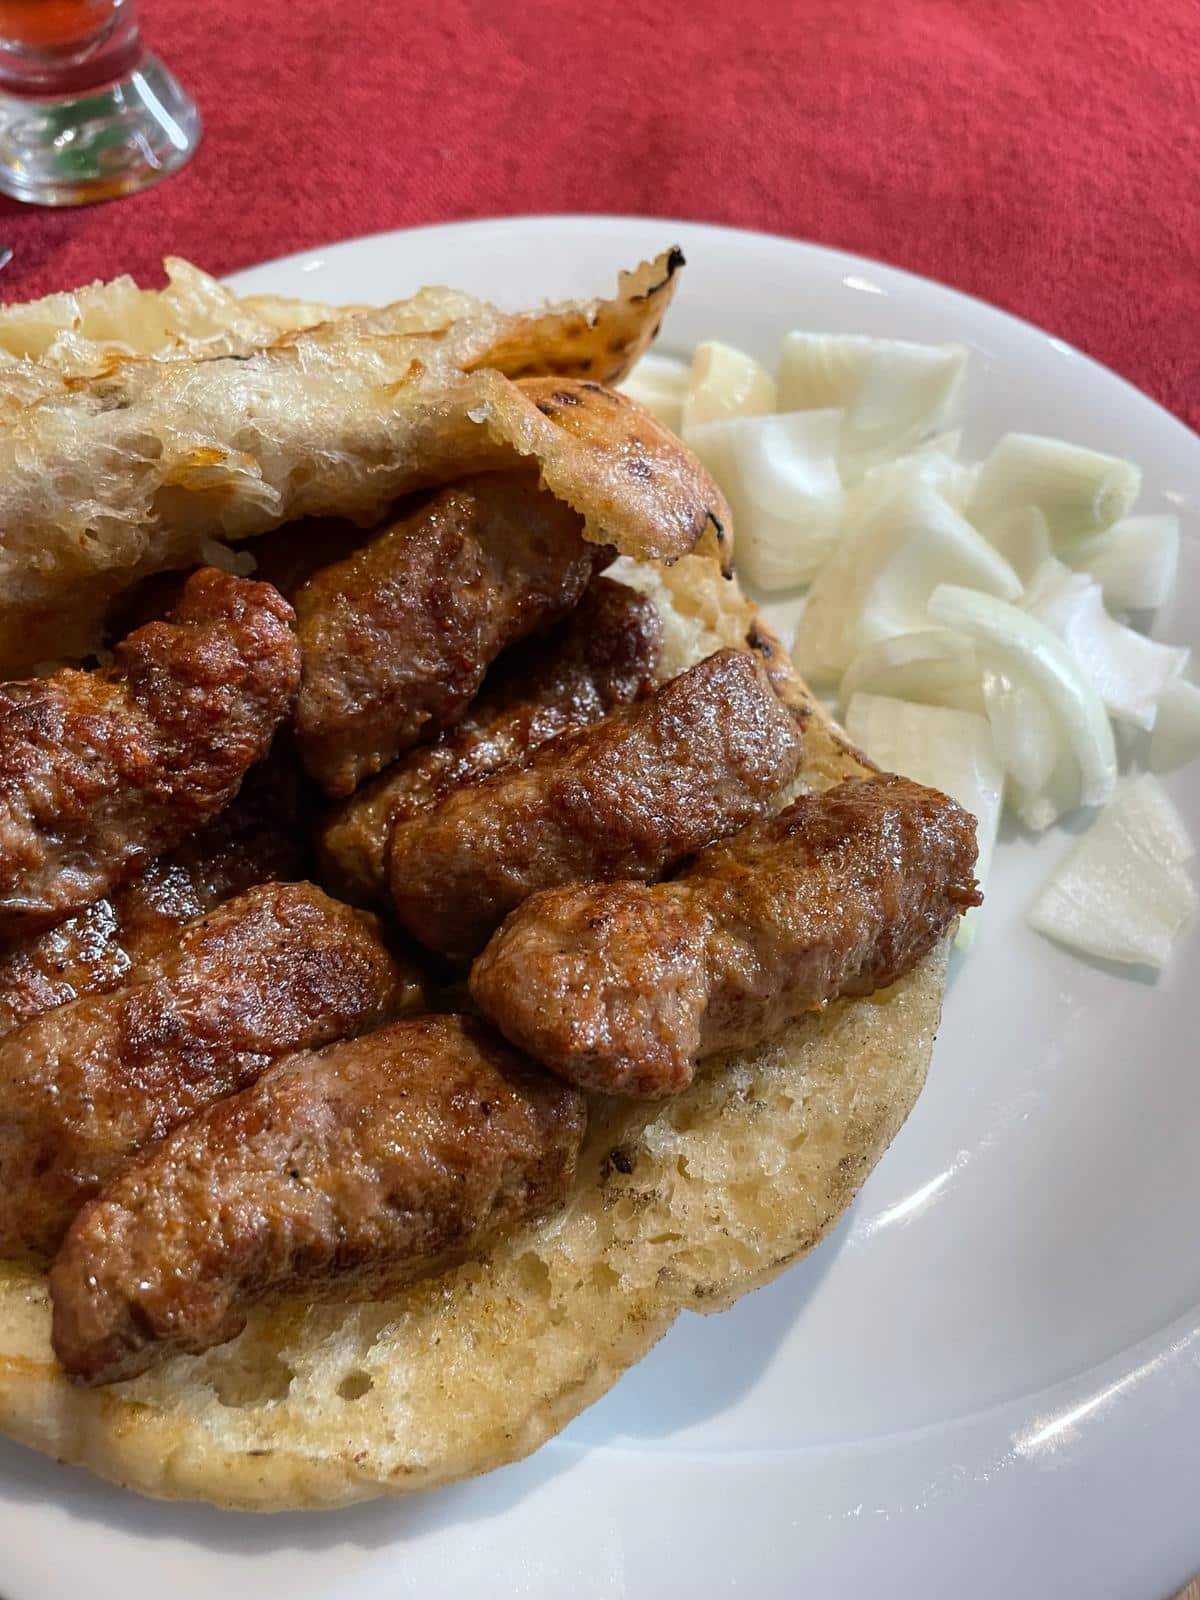 A plate of cevapi and onions, common in Croatia.